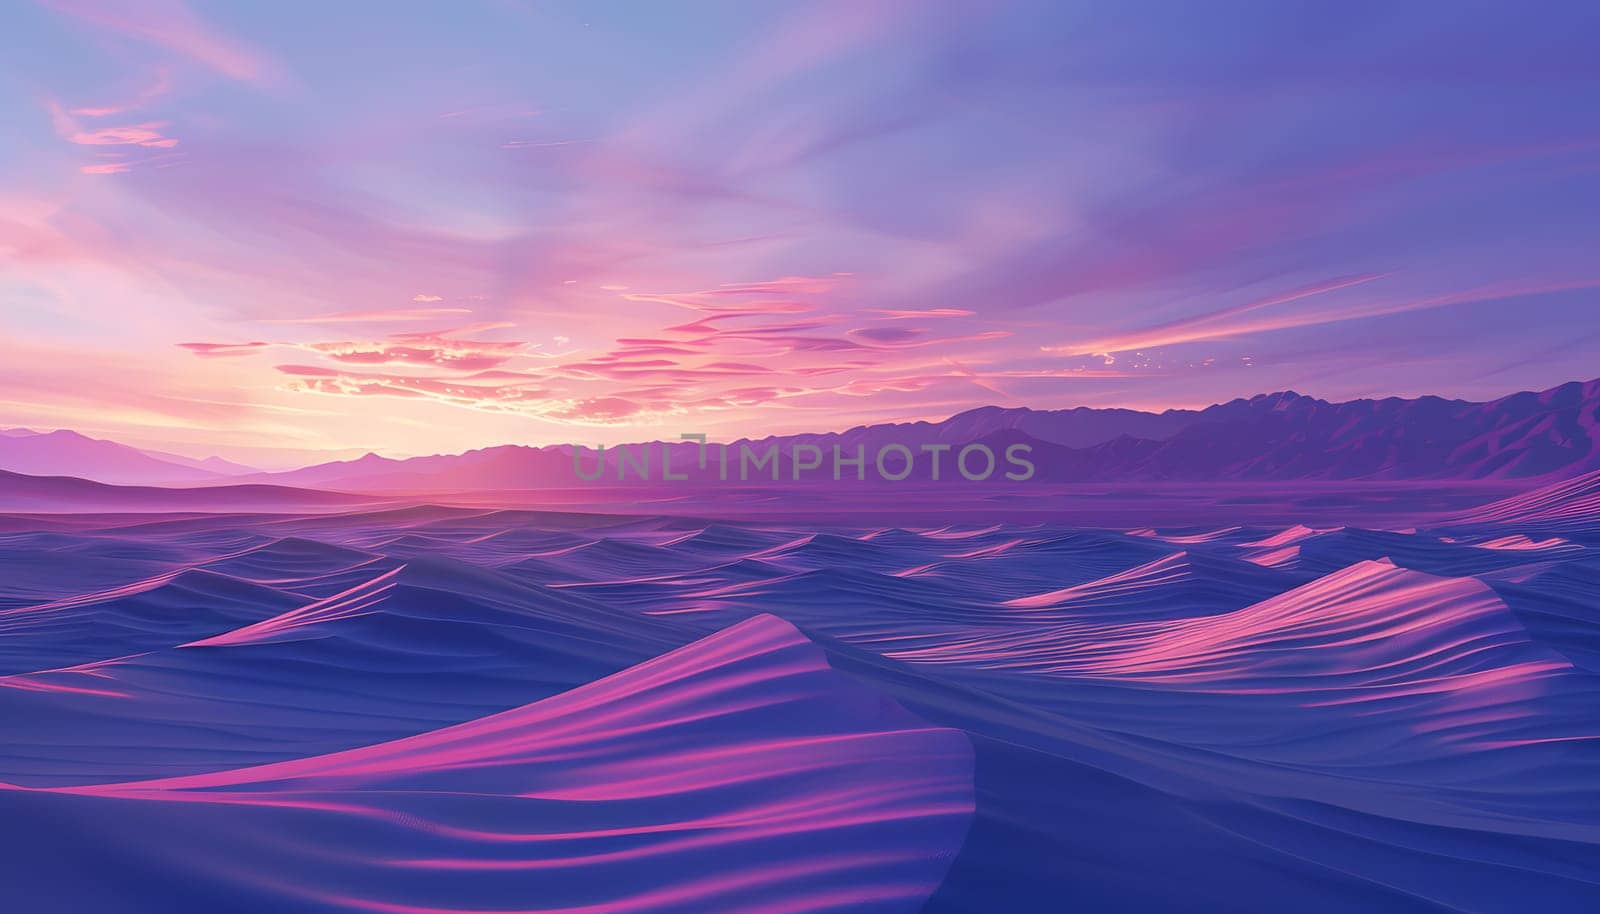 Violet sky with cumulus clouds over a desert landscape with mountains by Nadtochiy